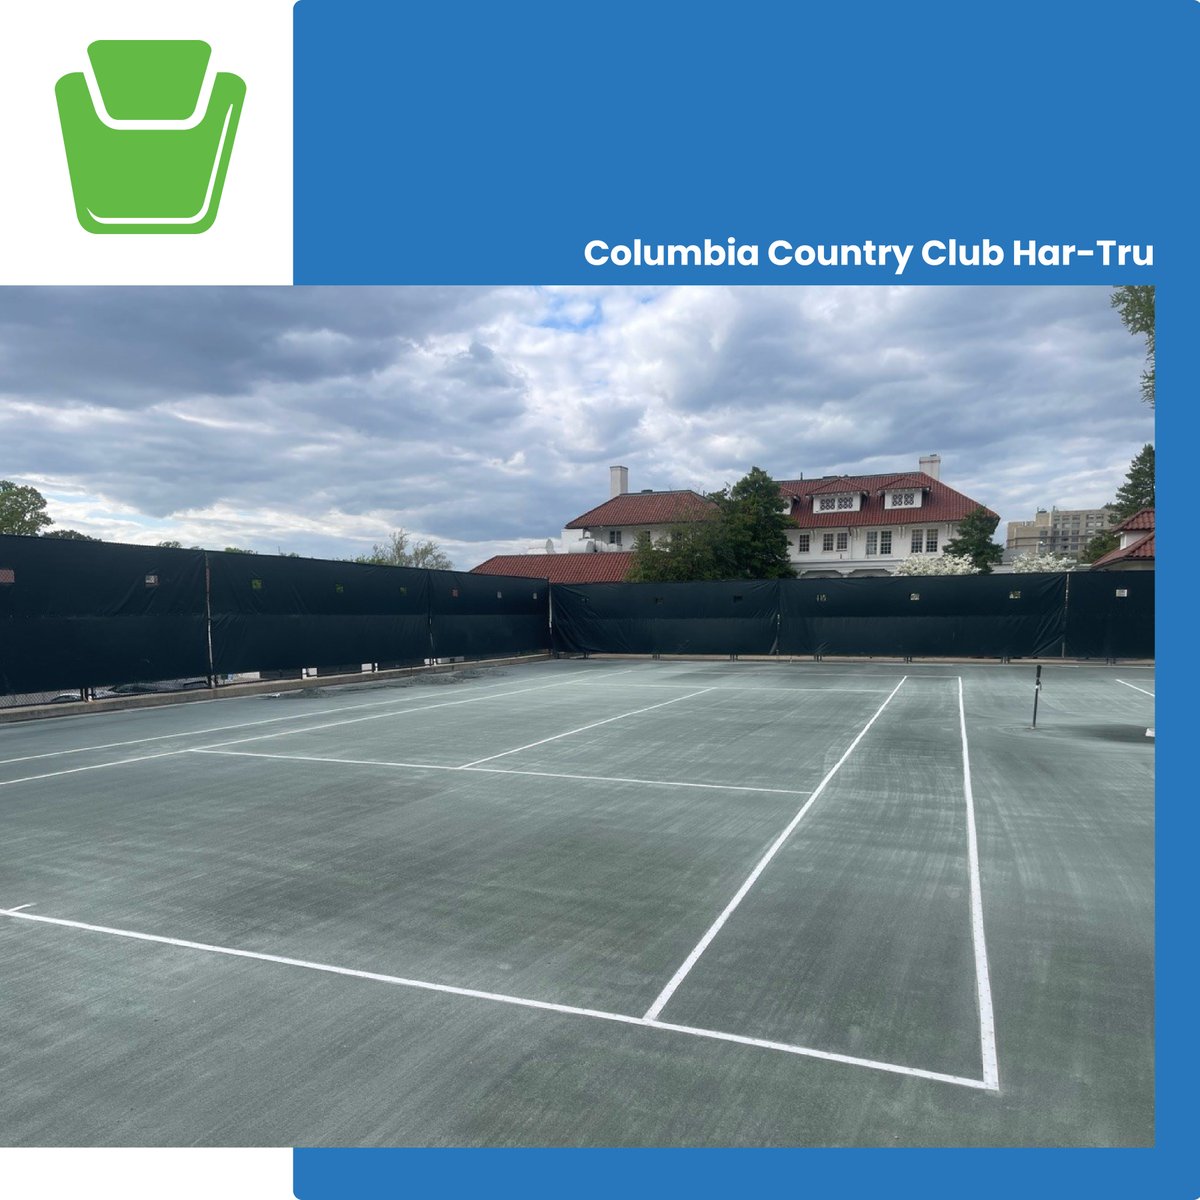 Unleash Your Tennis Game on Har-Tru and Discover the Advantages of Green Clay Courts. Check out some of Keystone's recent Har-Tru installs and keep us in mind for all your Har-Tru and tennis needs! #tennis #tennislife #HarTru #GreenClay #PlayOnClay #Keystone #SportsFieldExperts